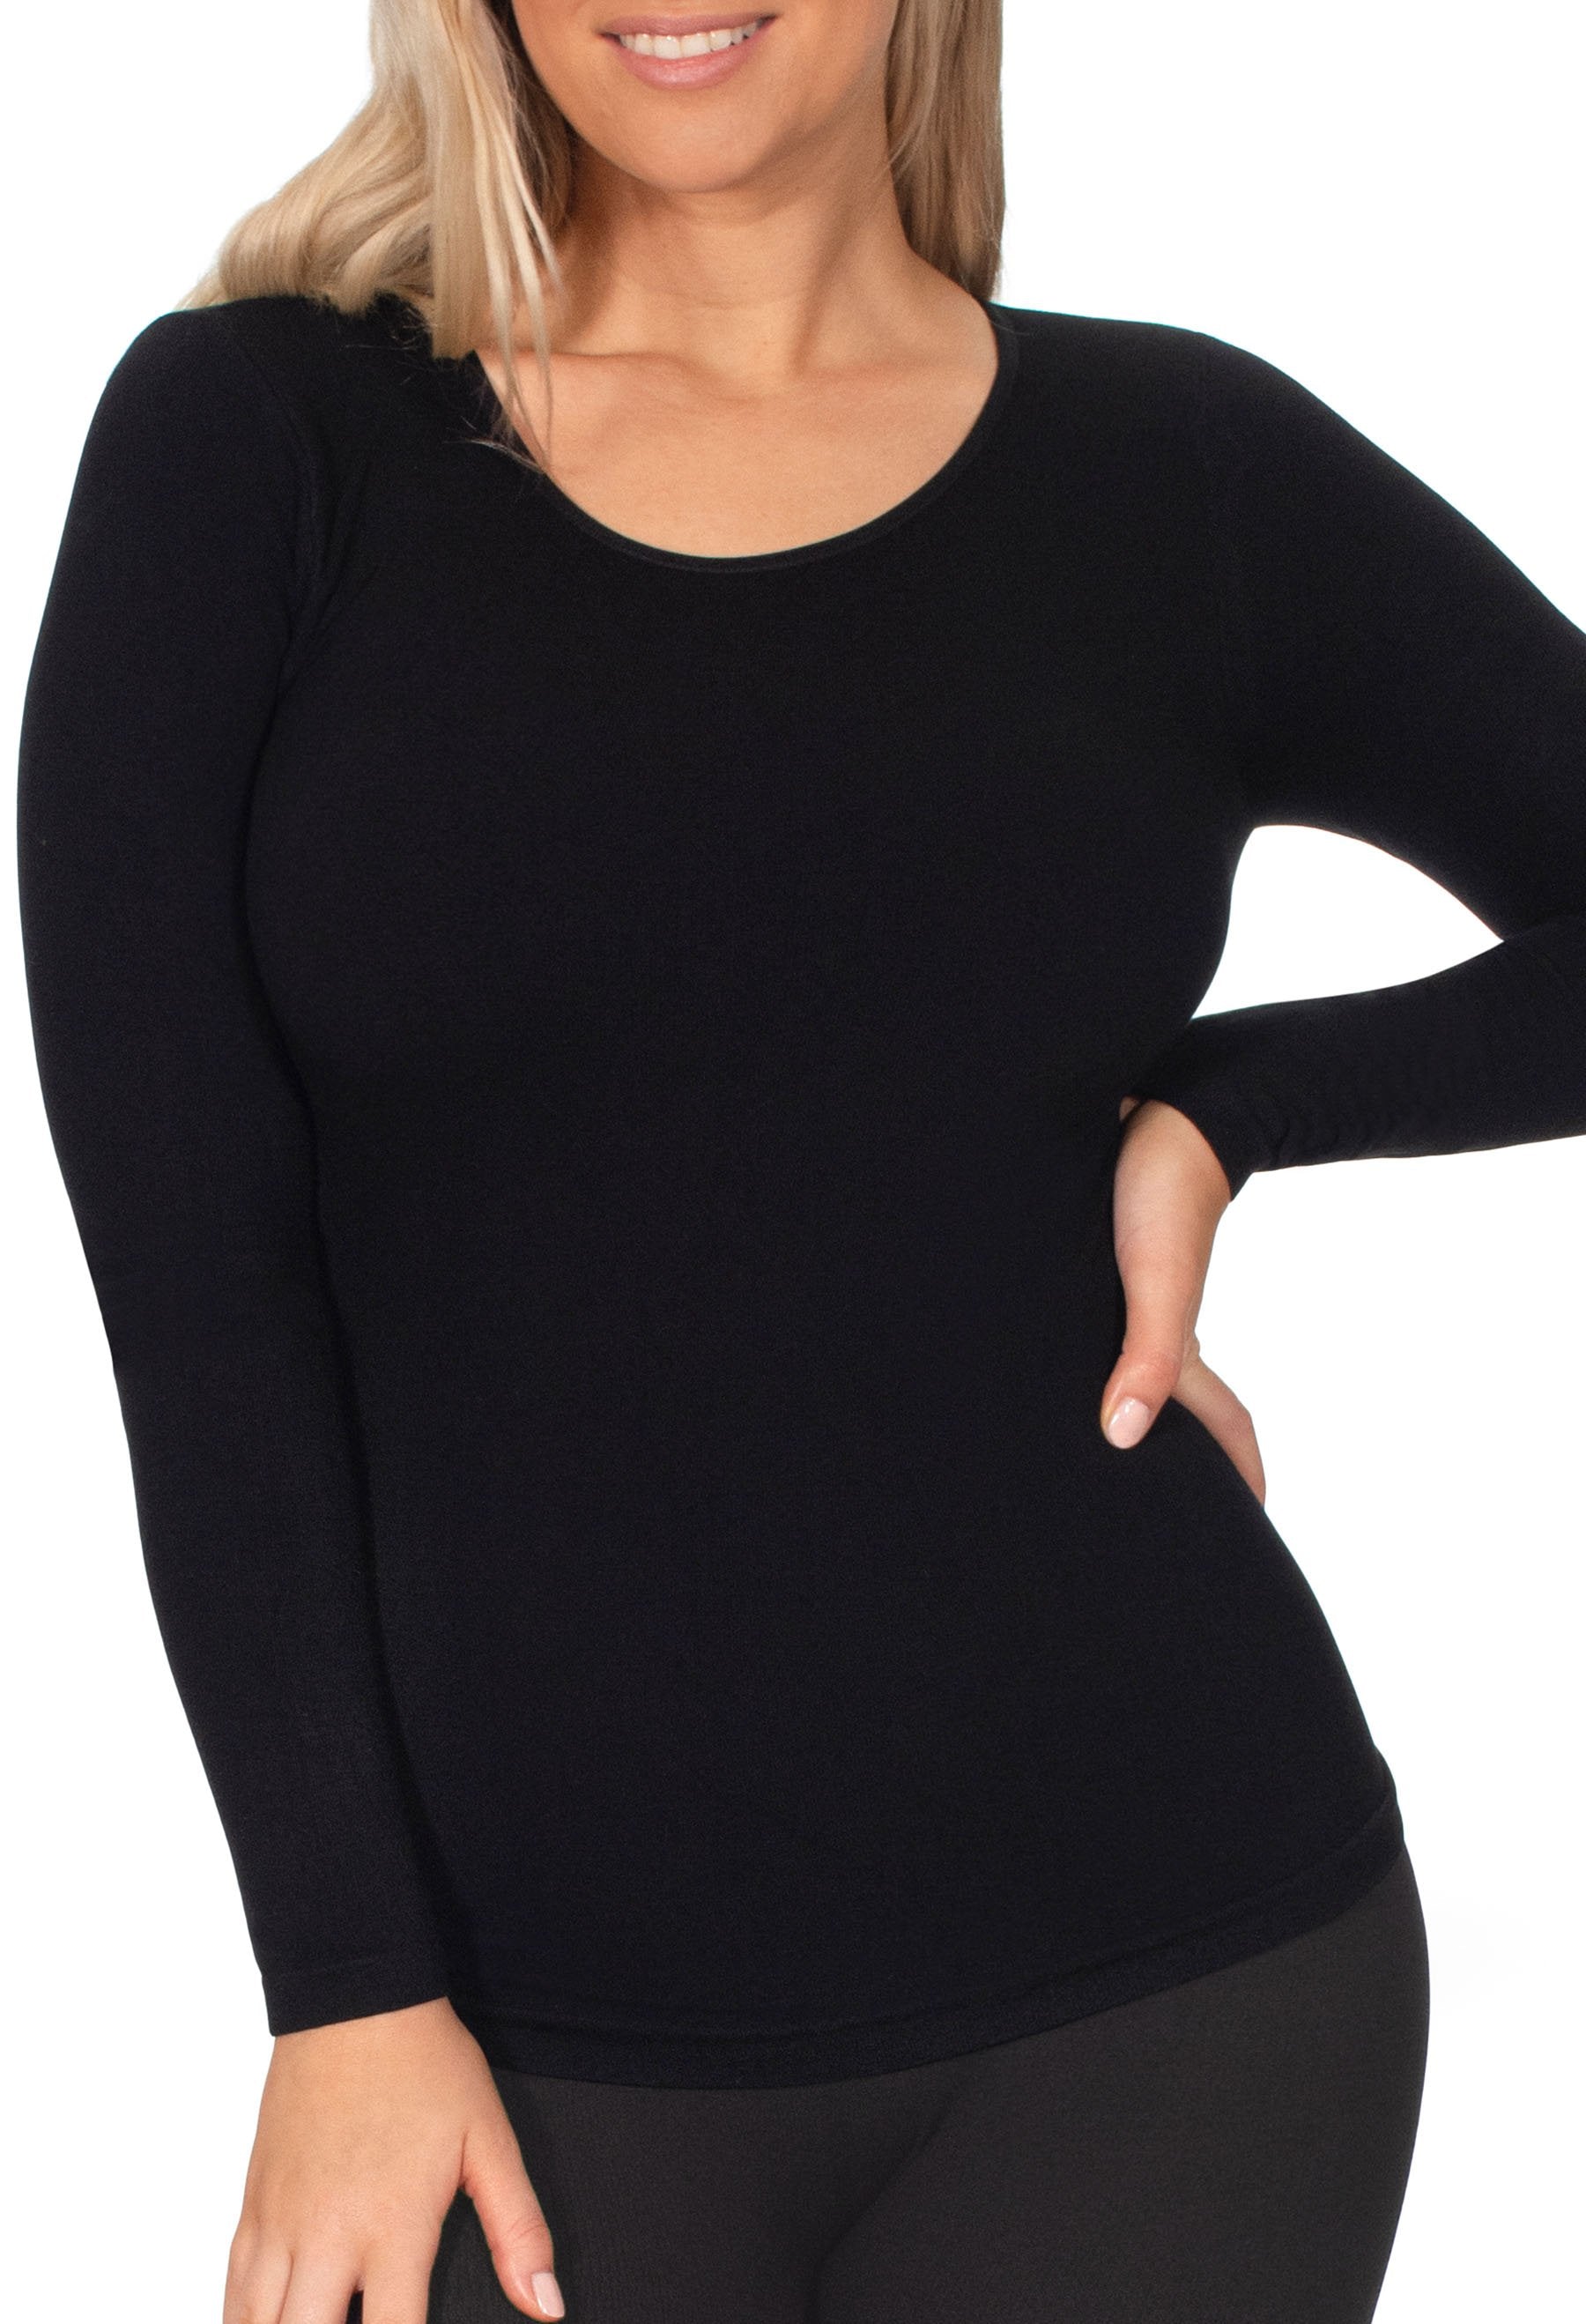 Women Soft Warm Long Sleeve Thermal Tops Round V-Neck Stretch Winter  Undershirts